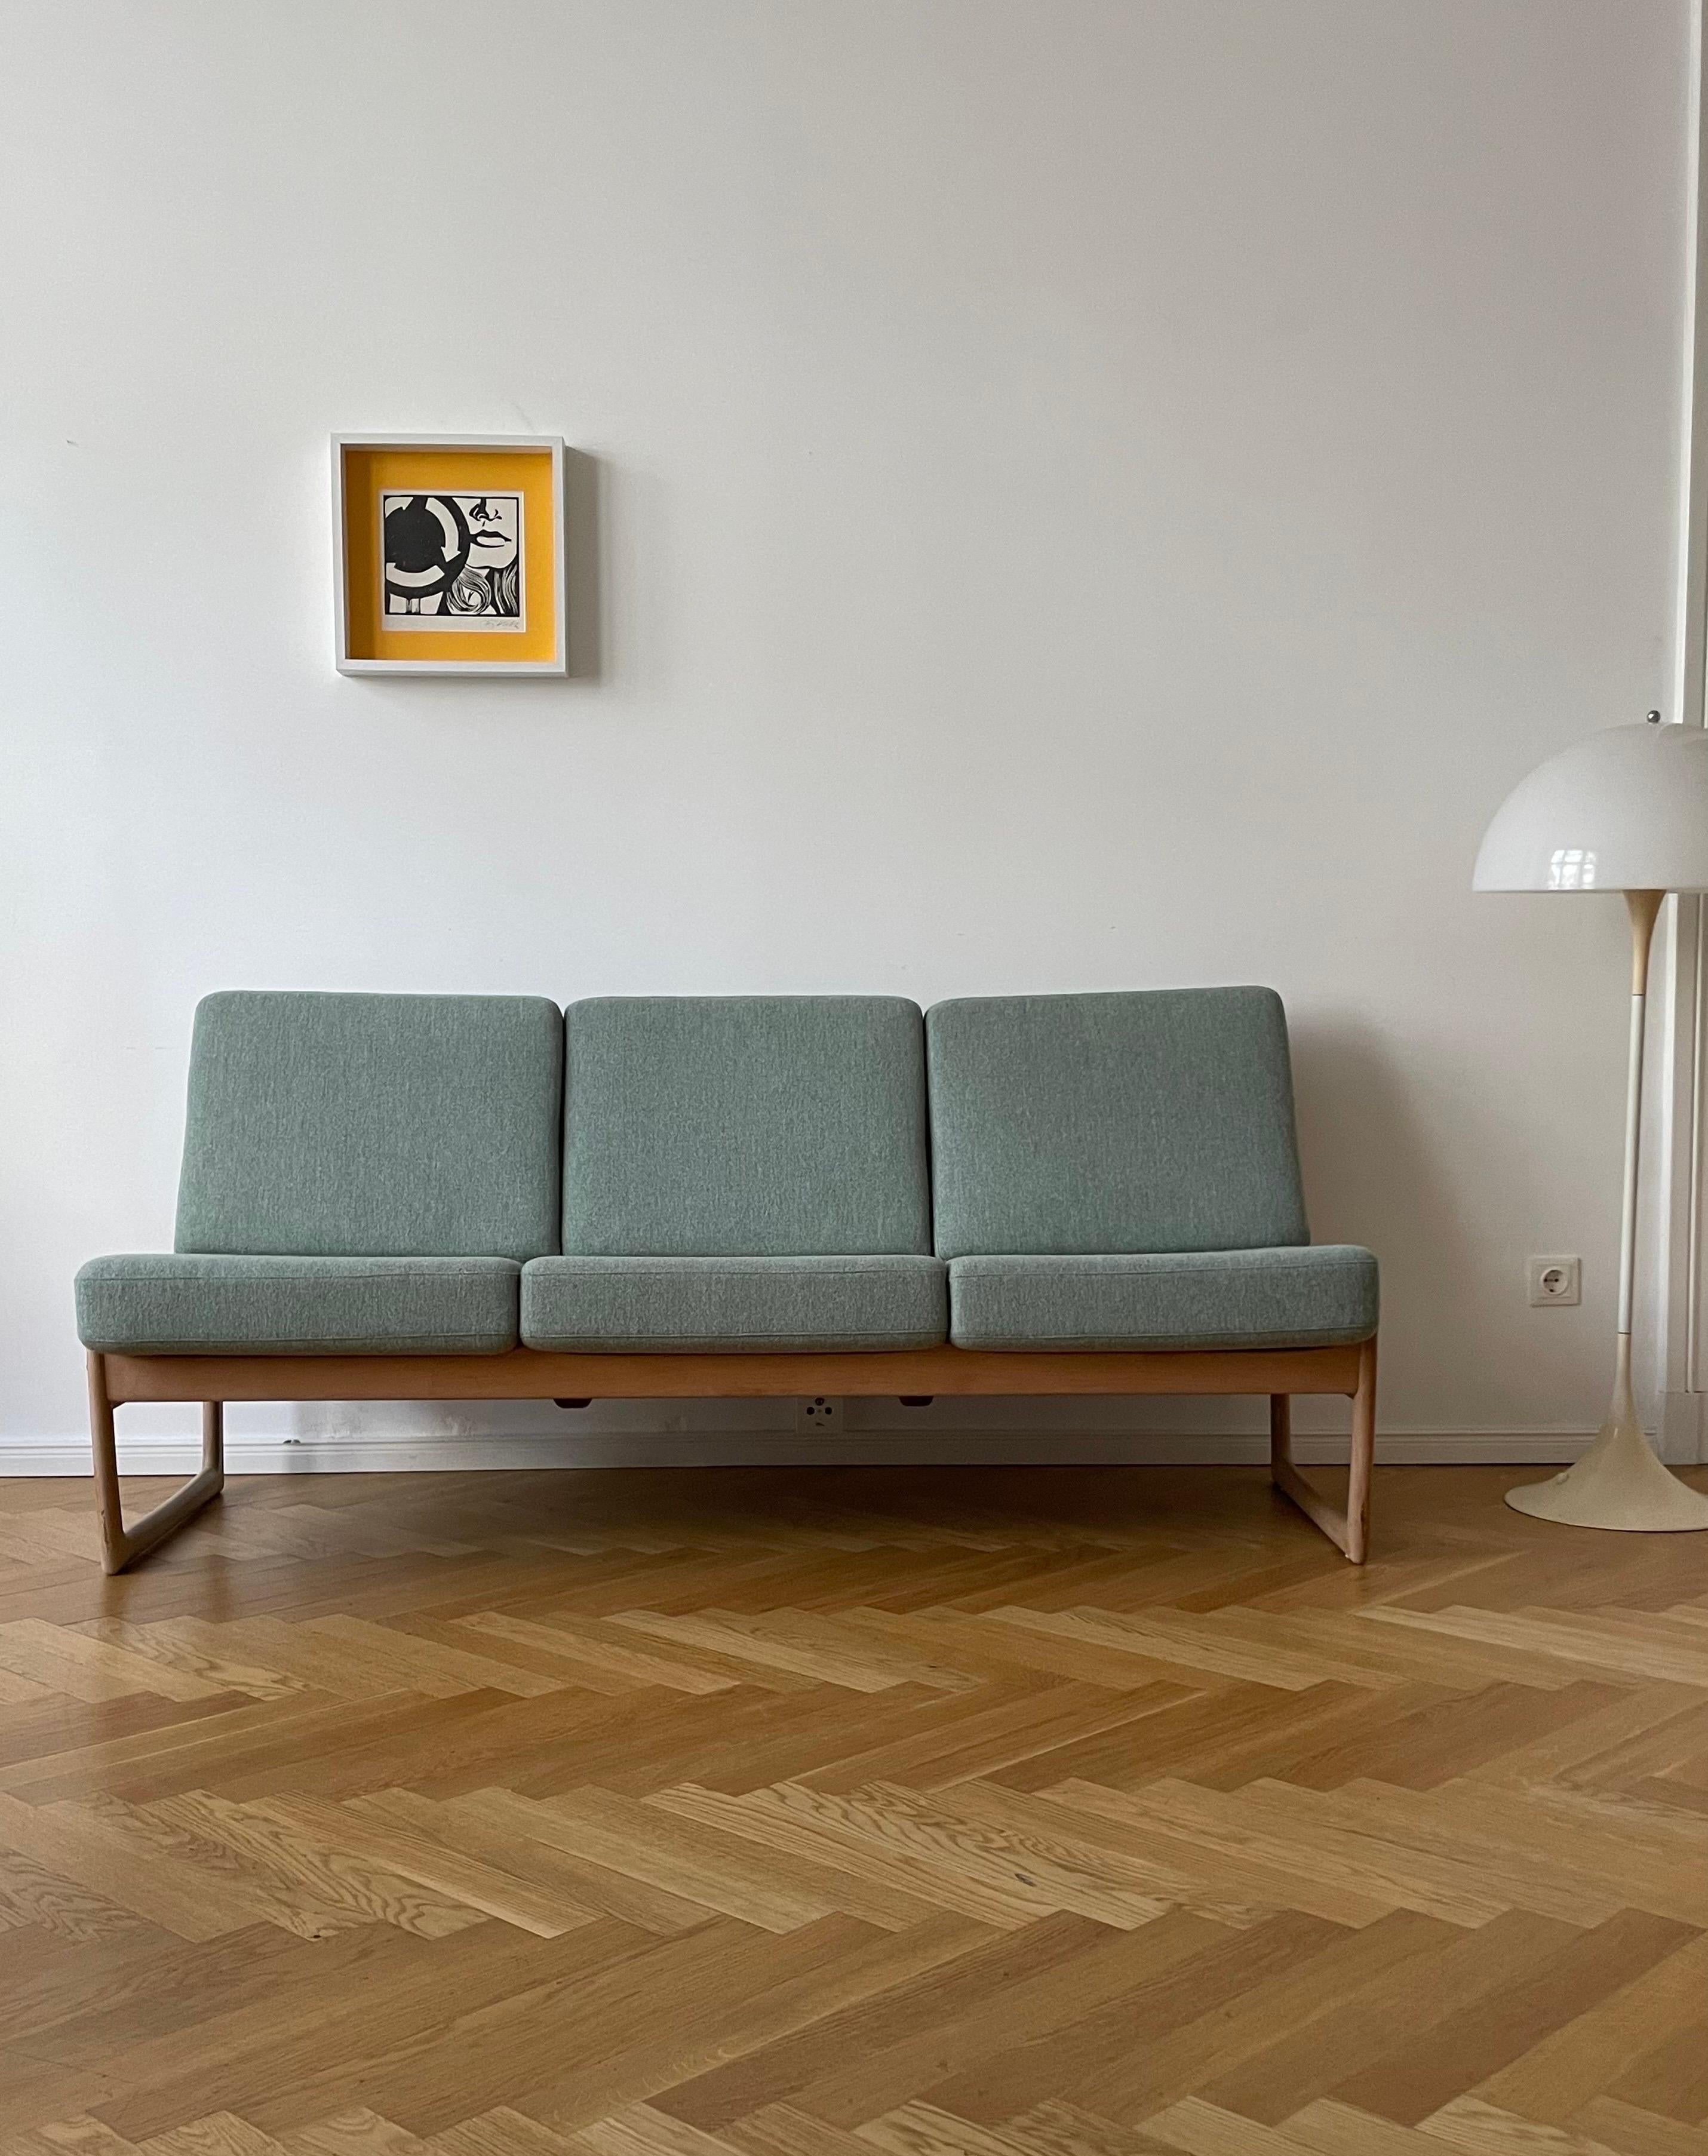 A comfortable 3seater sofa and daybed designed by Danish architects Peter Hvidt & Orla Mølgaard Nielsen. Made in Denmark by France & Daverkosen during the 1950's. This model FD130/3 features a compact size with a wooden frame in oak with a new